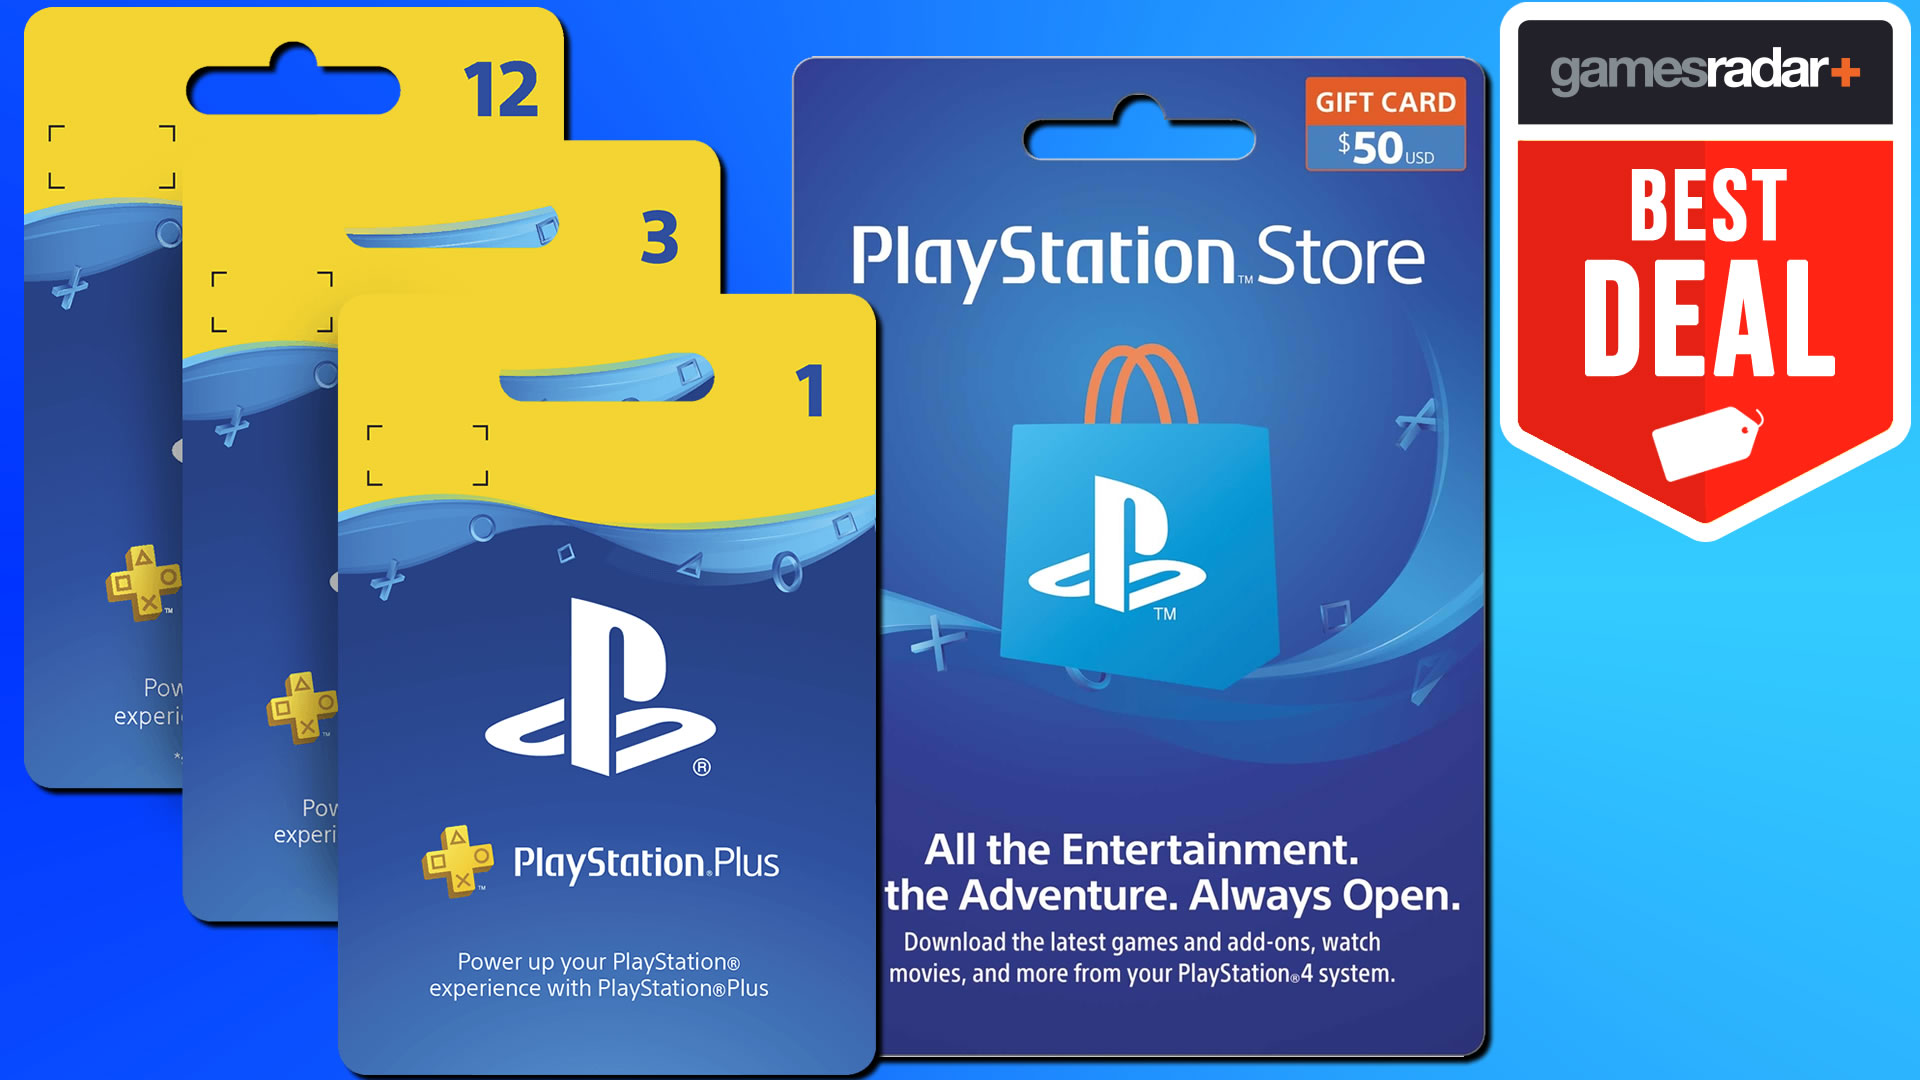 How to Redeem PlayStation Store Gift Cards on PS5, Web, and PS App 